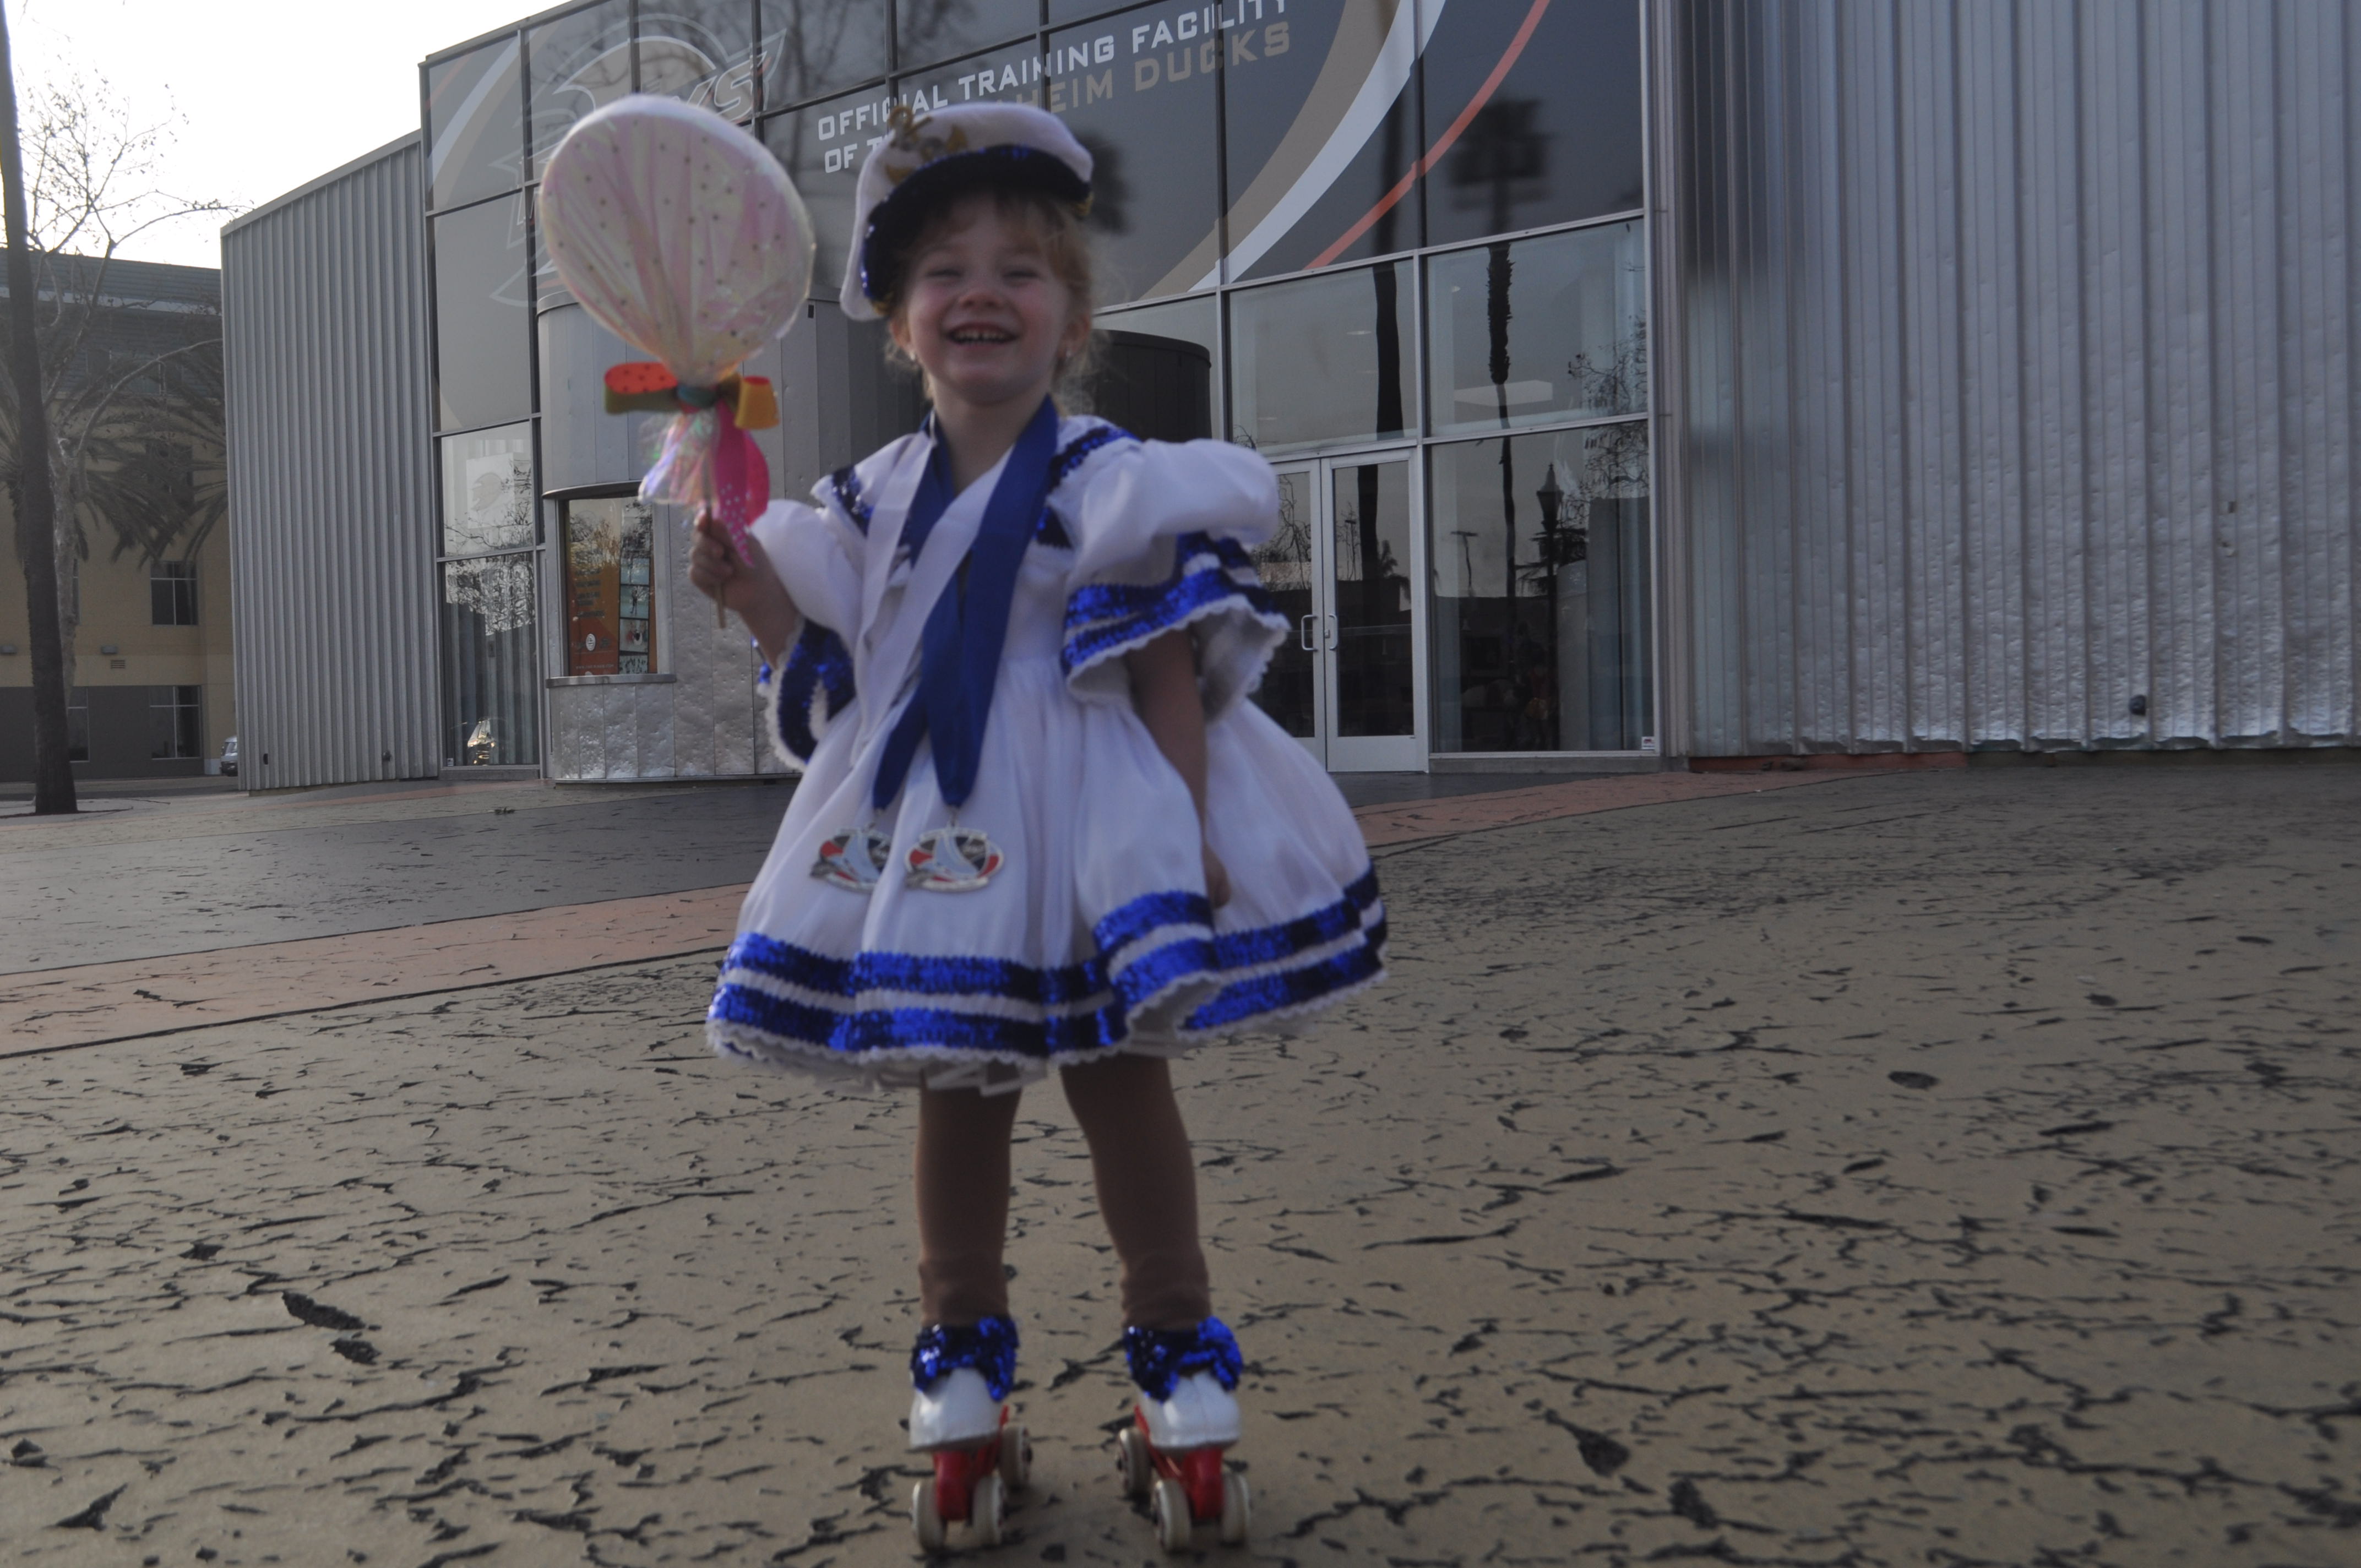 After three days of figure skating competition and three 1st place medals at Anaheim Rosanna ready to roller skate home. Sailor's costume custom-designed and custom-made by Oxana Foss